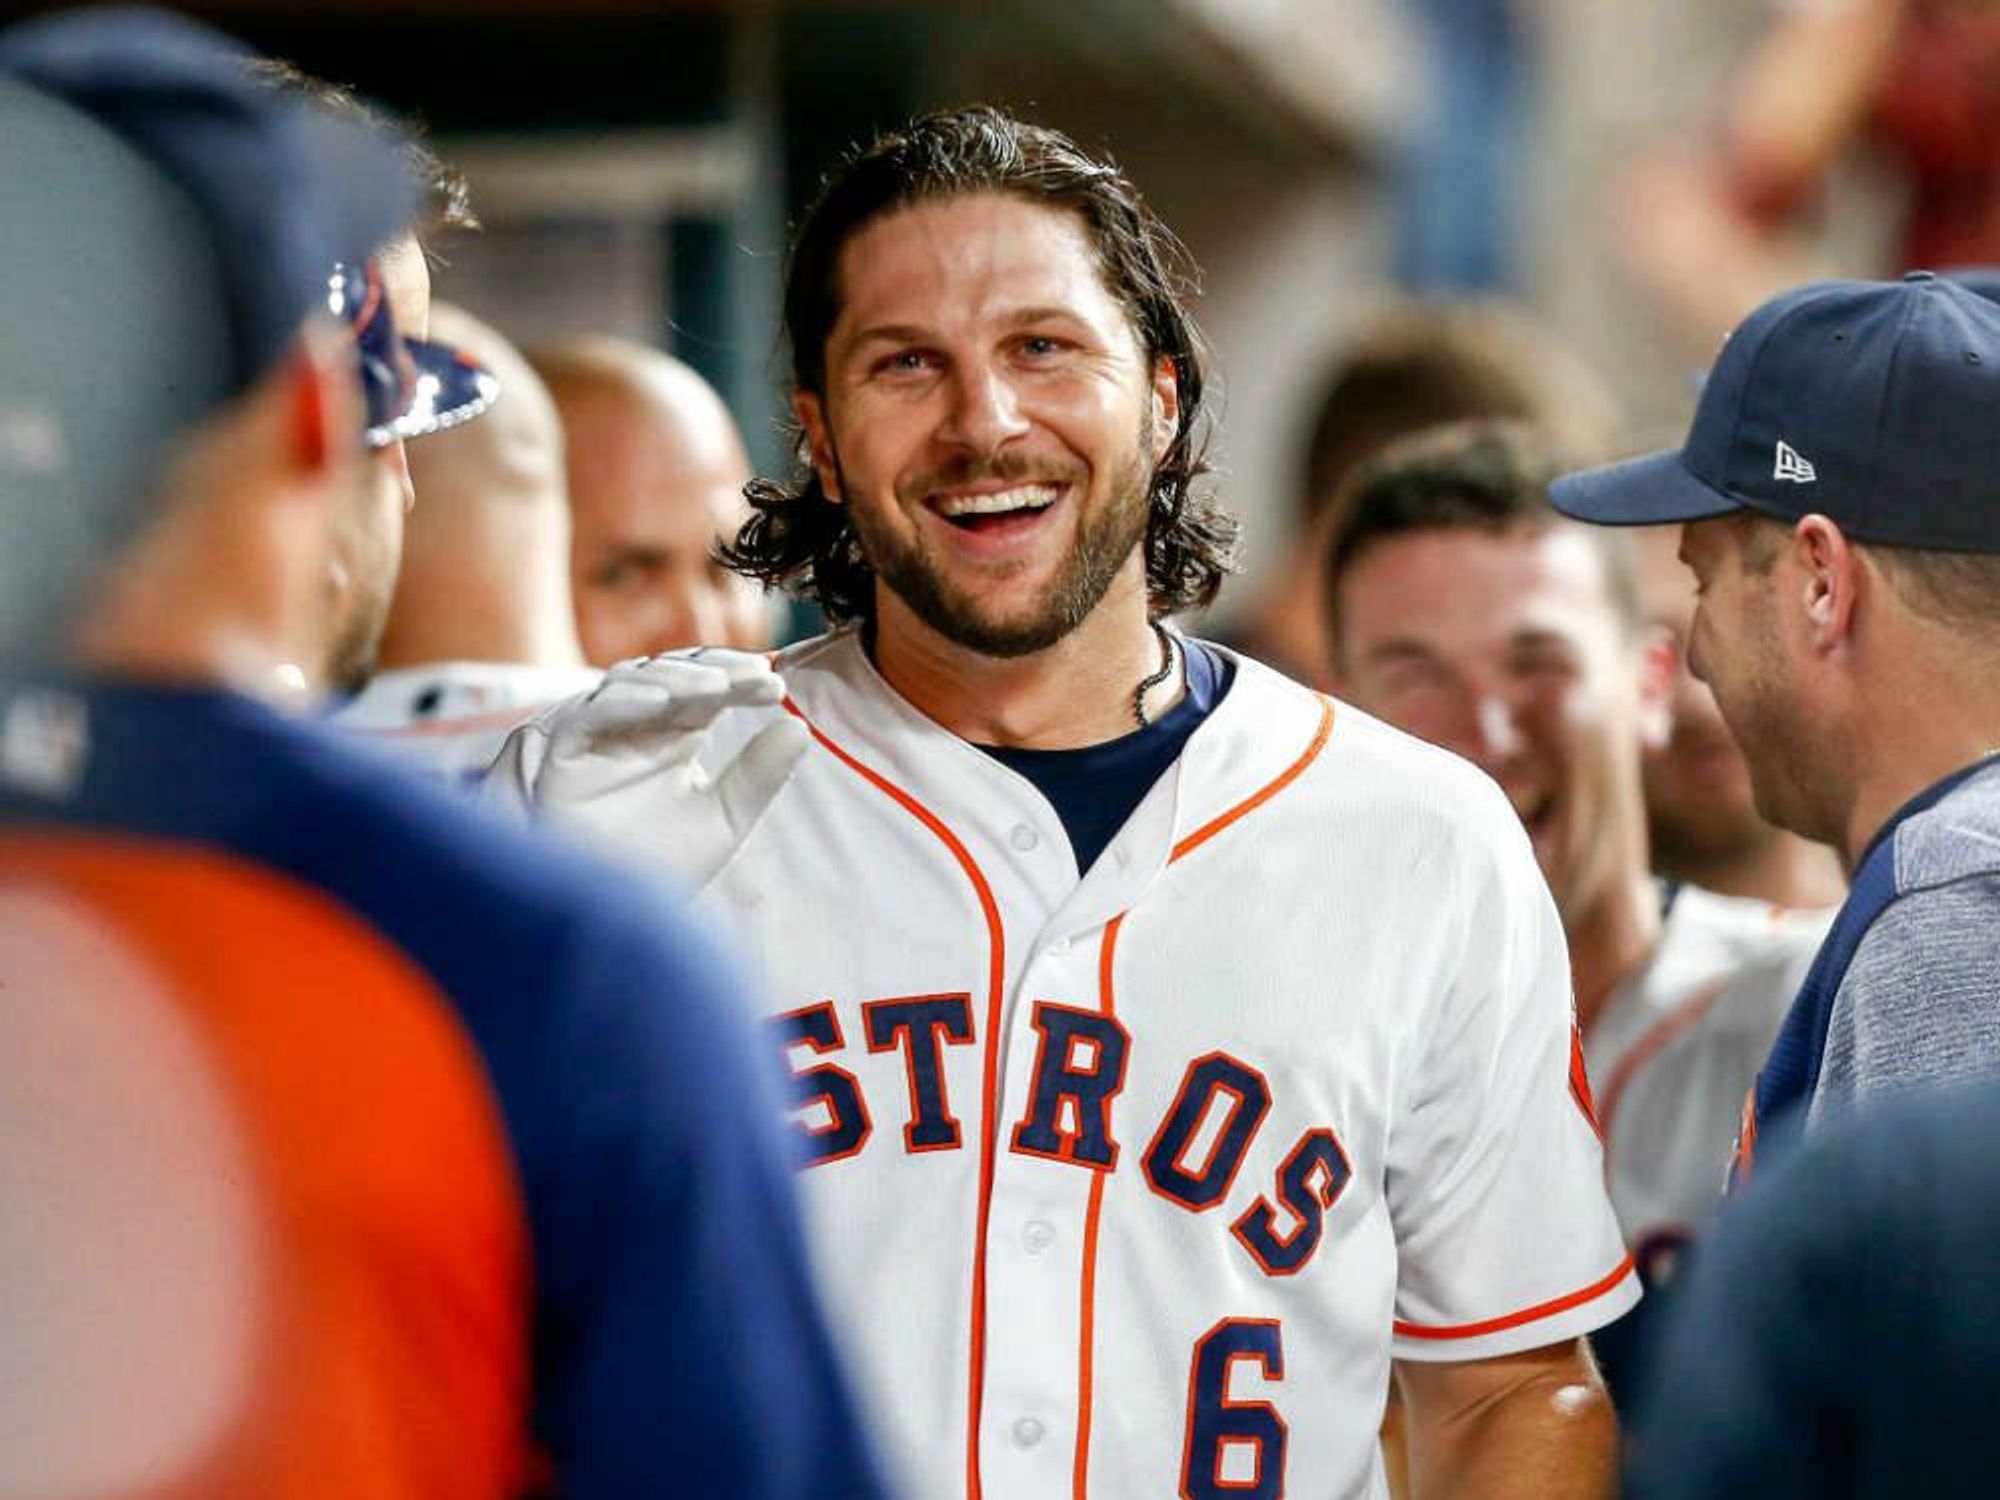 Ken Hoffman pitches 10 questions to Houston Astros star Jake